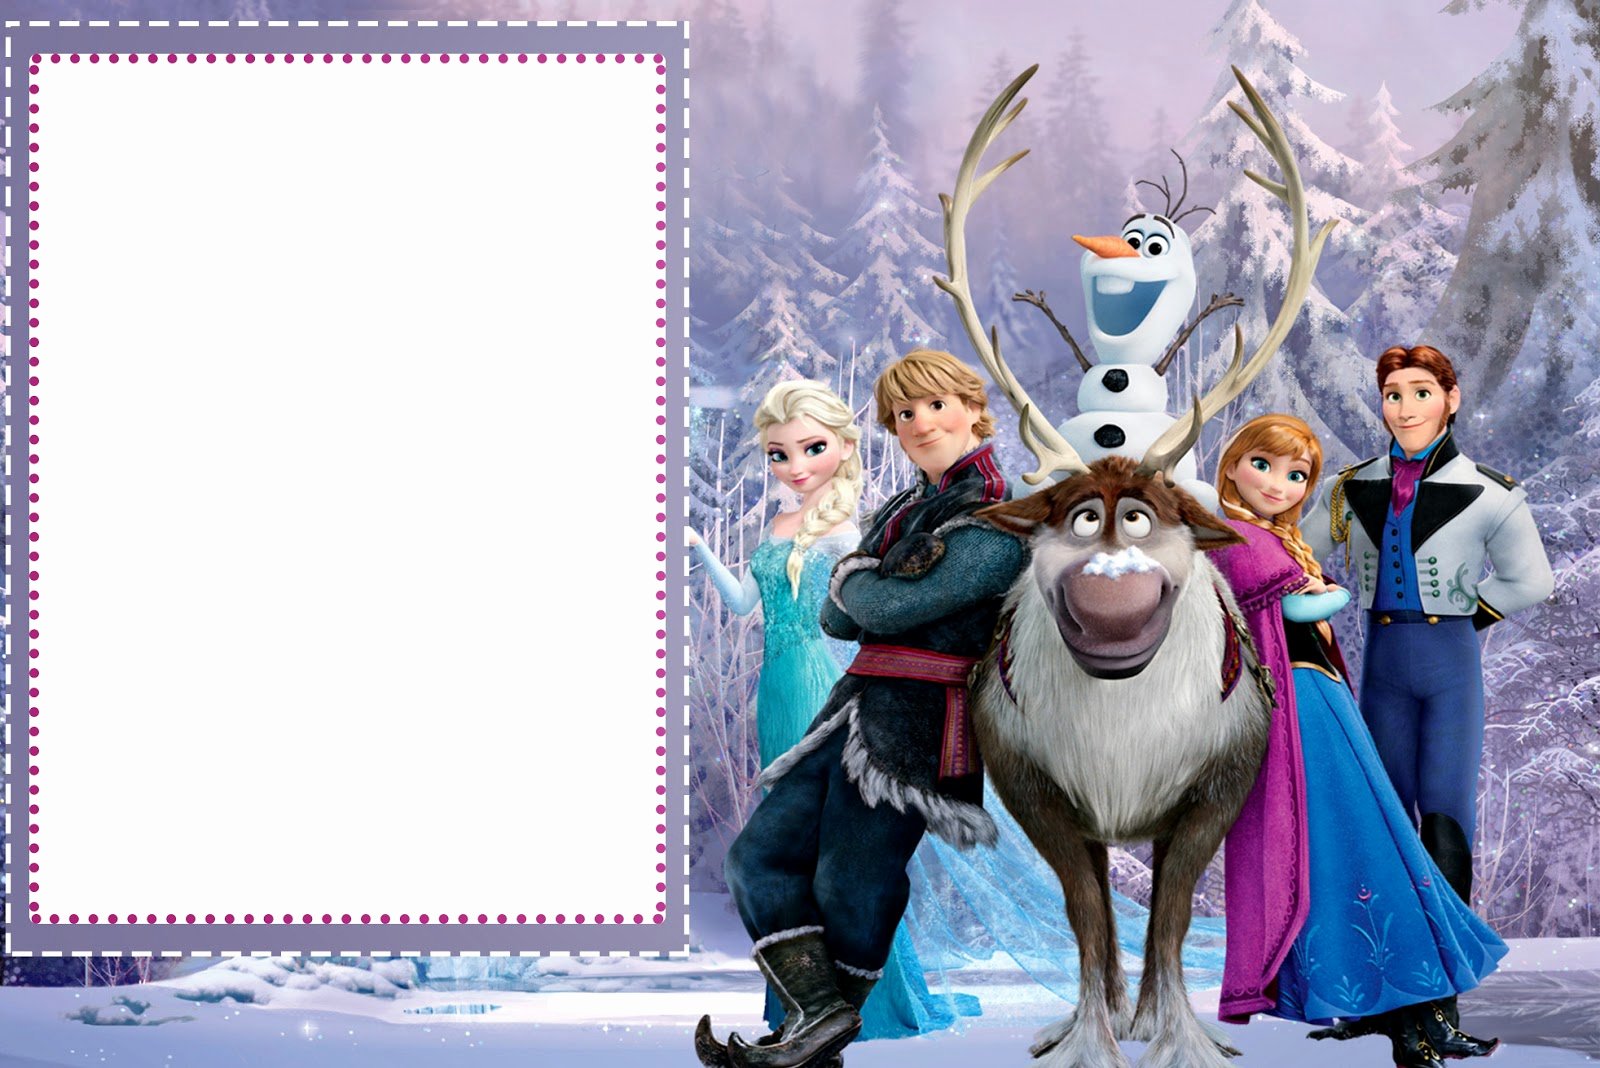 Frozen Birthday Card Printables Fresh Frozen Free Printable Cards or Party Invitations Oh My